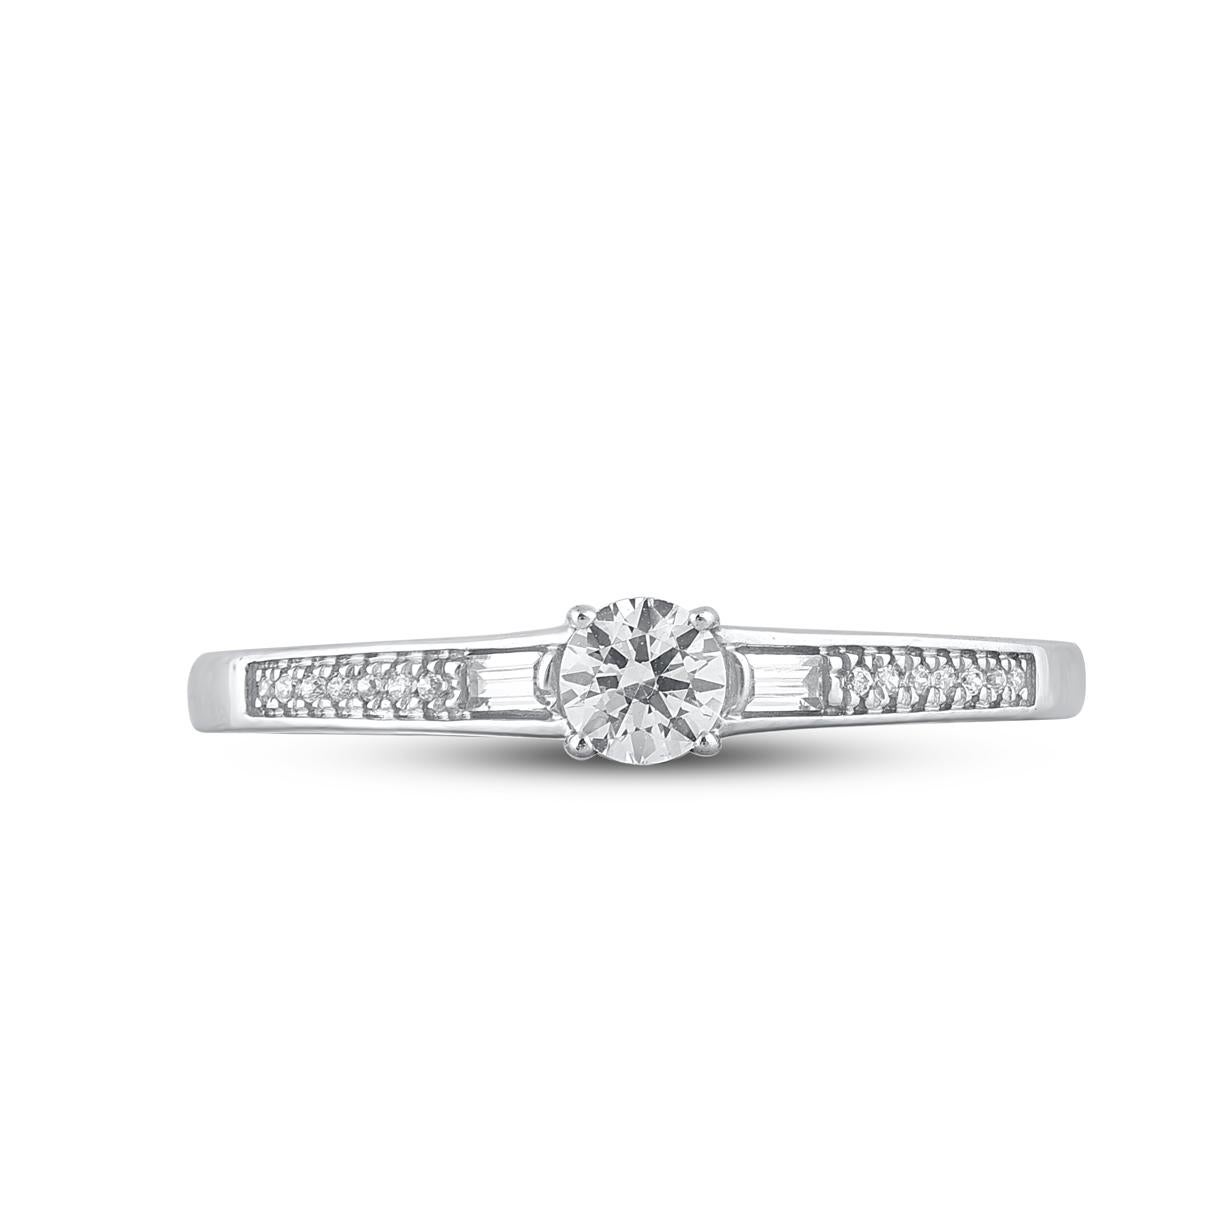 A sweet symbol of your everlasting romance, expertly crafted in 14 Karat white gold and shines with 17 single cut, brilliant cut and baguette cut diamond in prong, pave and channel setting.
The total weight of diamonds is 0.25 carat, H-I color and